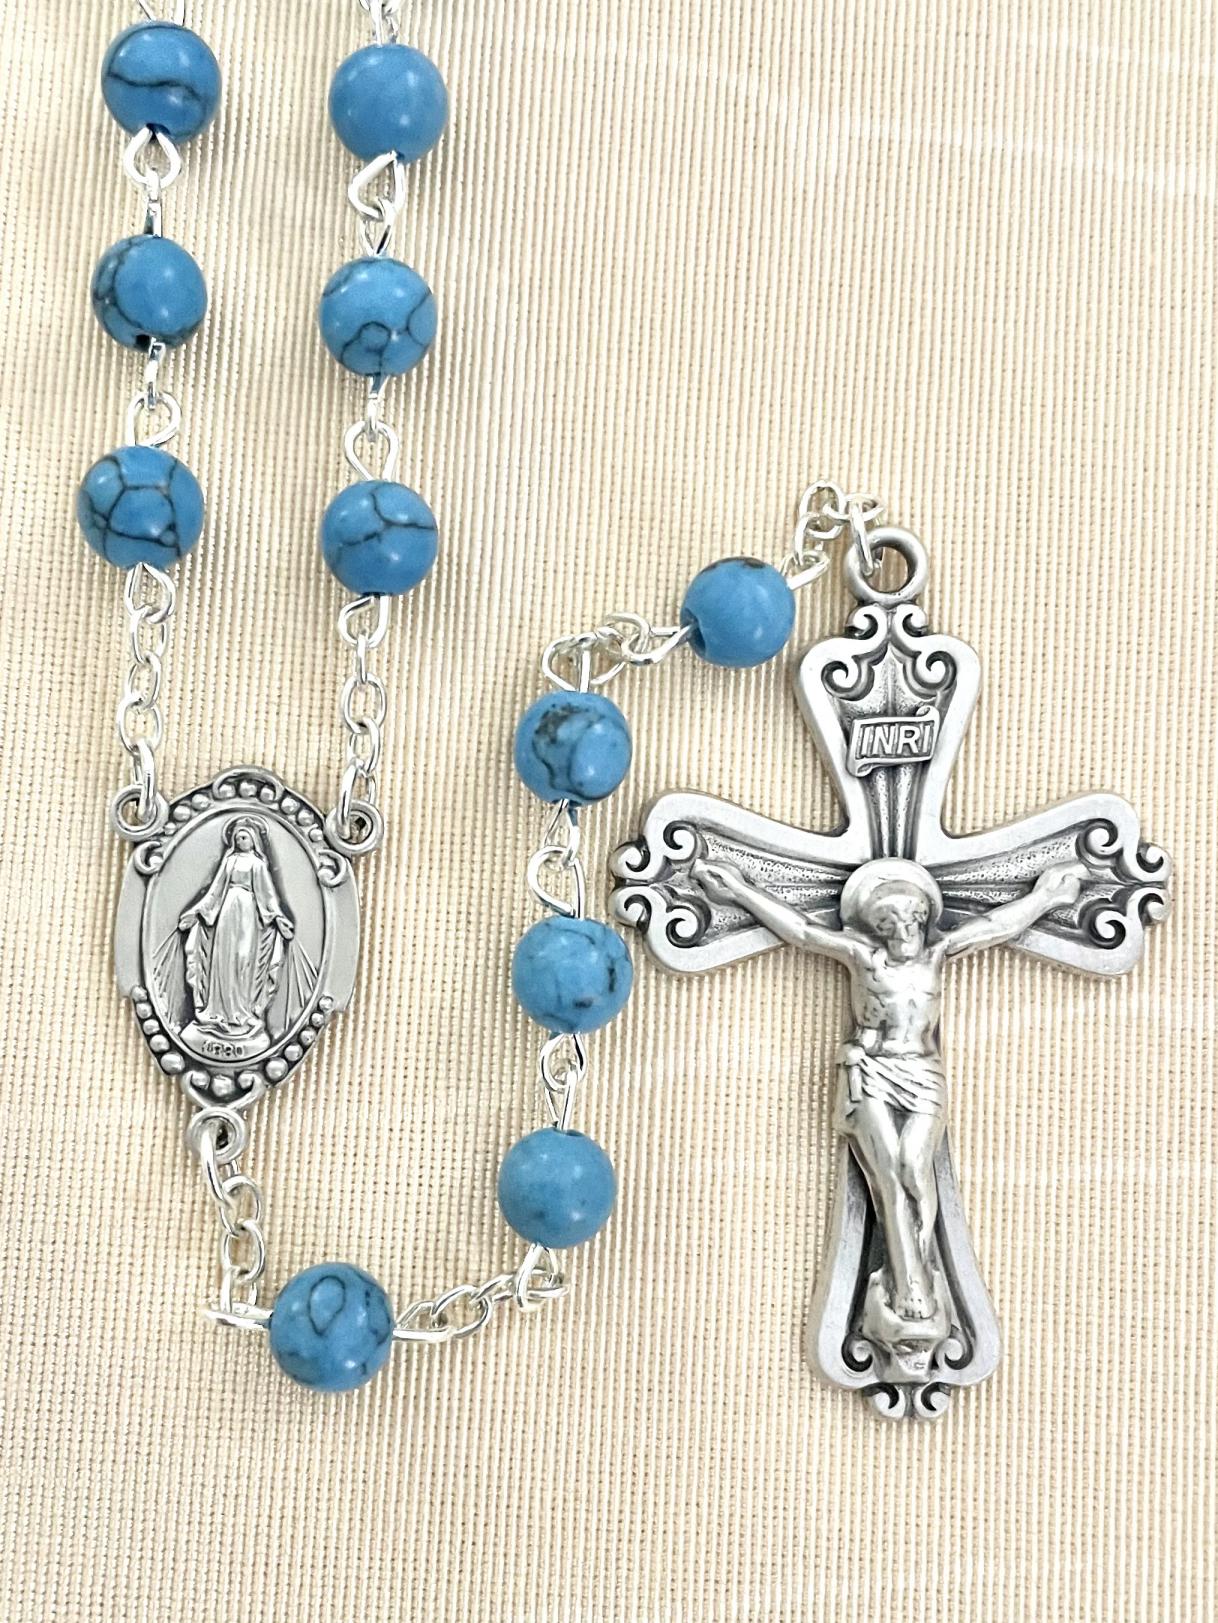 6mm TURQUOISE GEMSTONE ROSARY WITH STERLING SILVER CRUCIFIX AND CENTER GIFT BOXED